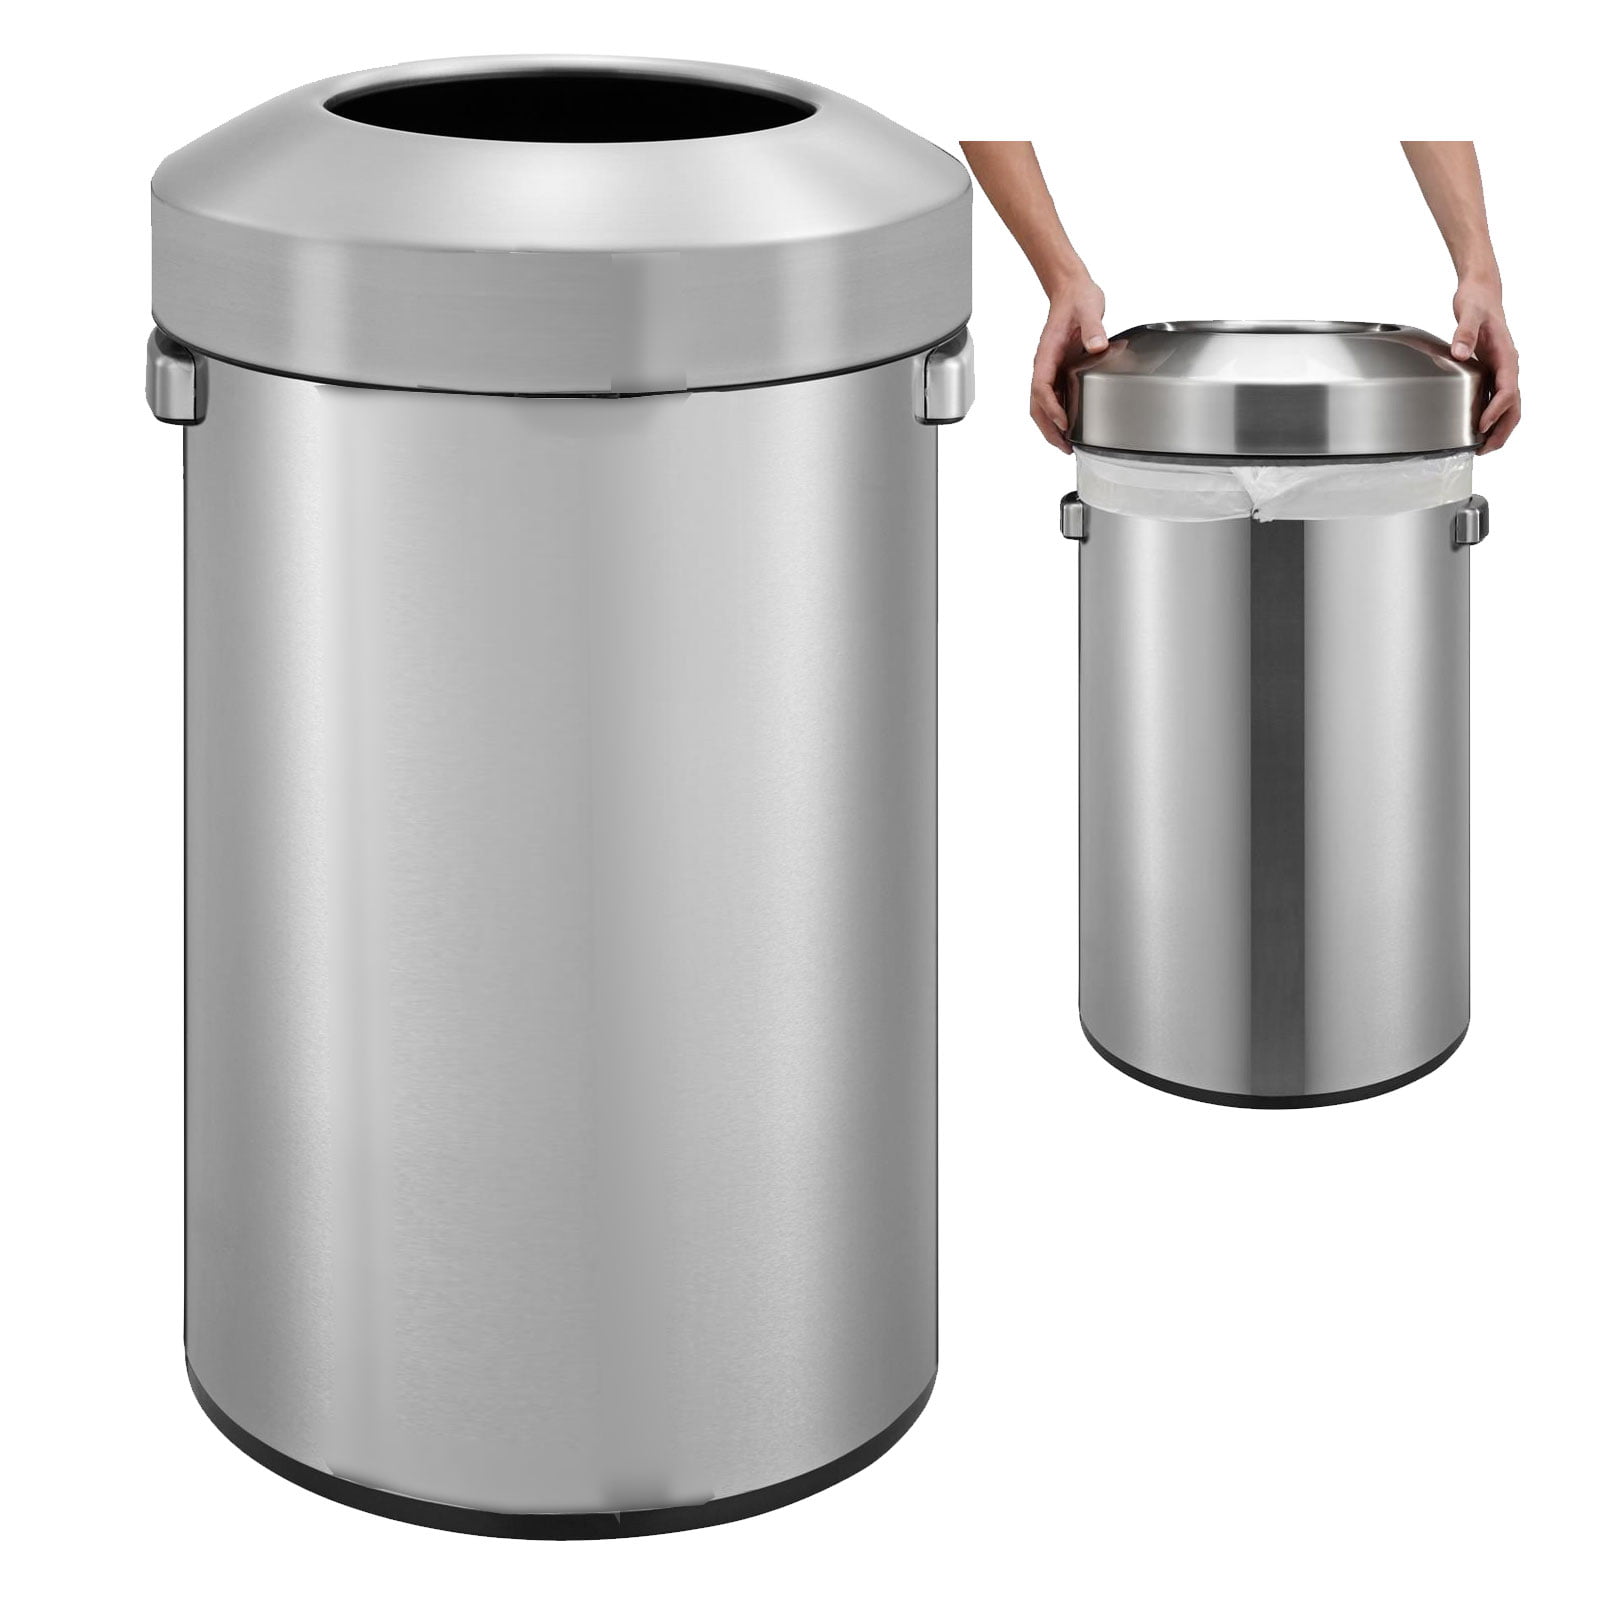 TEXAS RAGTIME Stainless Steel Trash Can with Open Lid, 24 Gallon, for Commercial Stainless Steel Garbage Cans